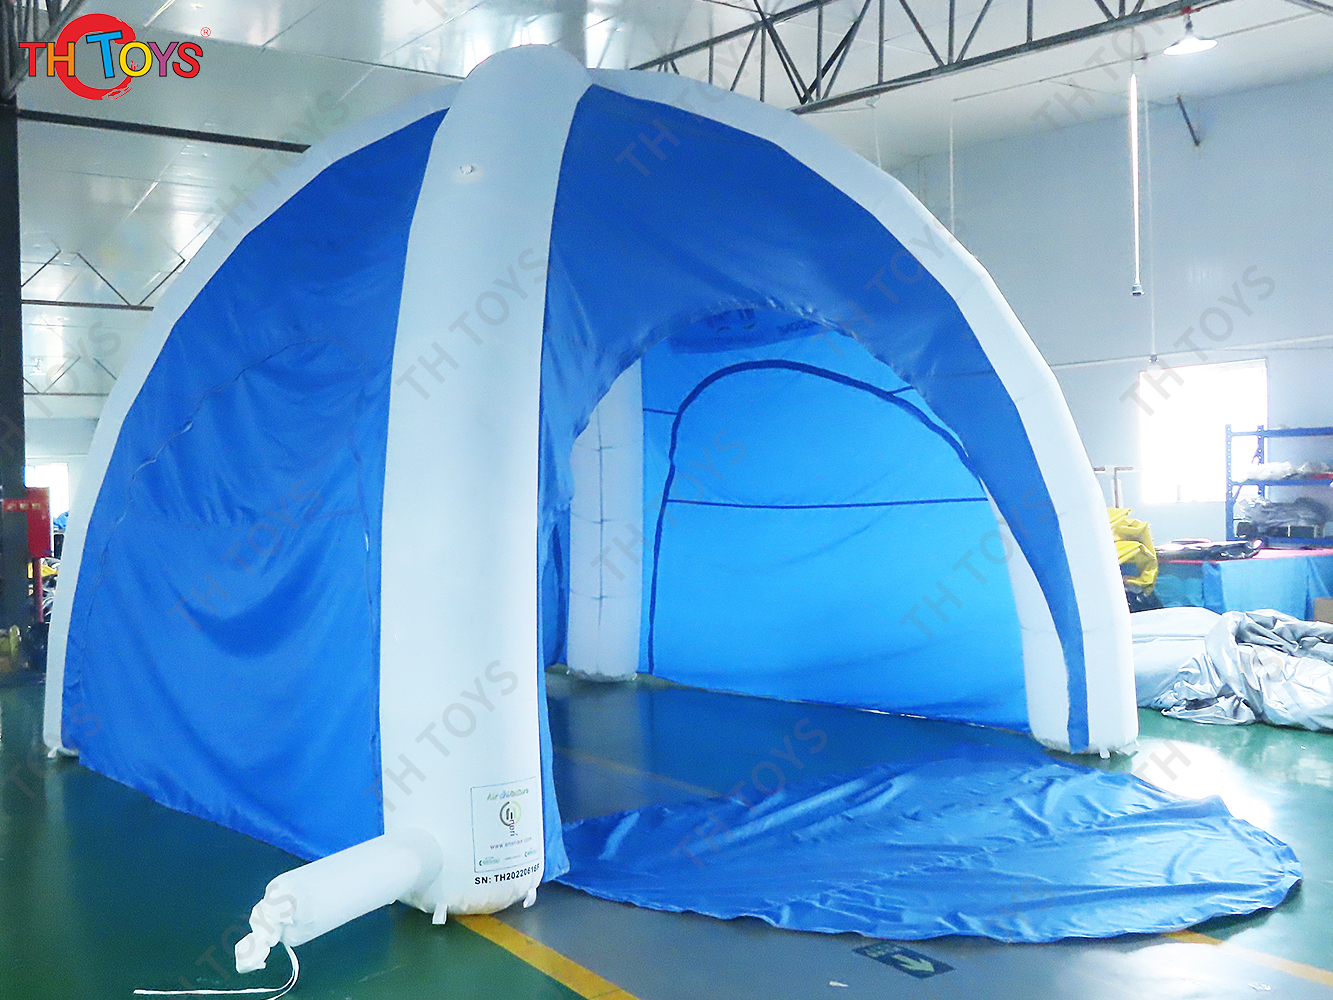 Blue and White Inflatable Spider Dome Tent for Commercial Advertising Promotion